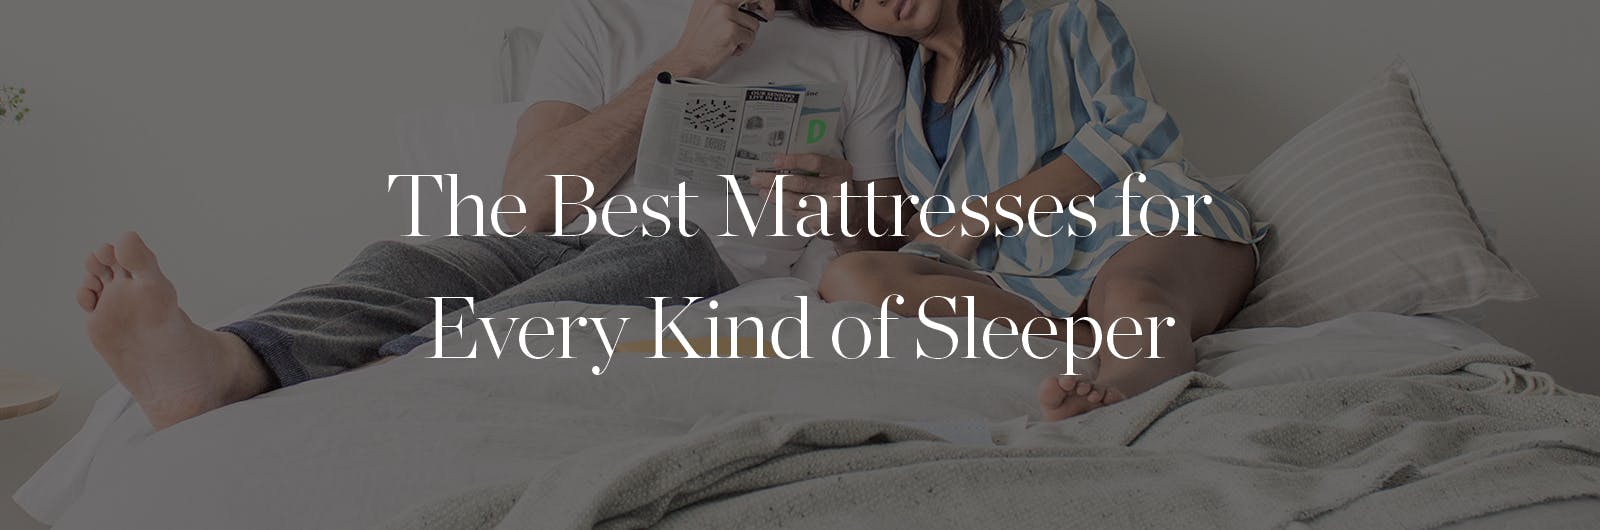 The Best Mattress for Every Kind of Sleeper